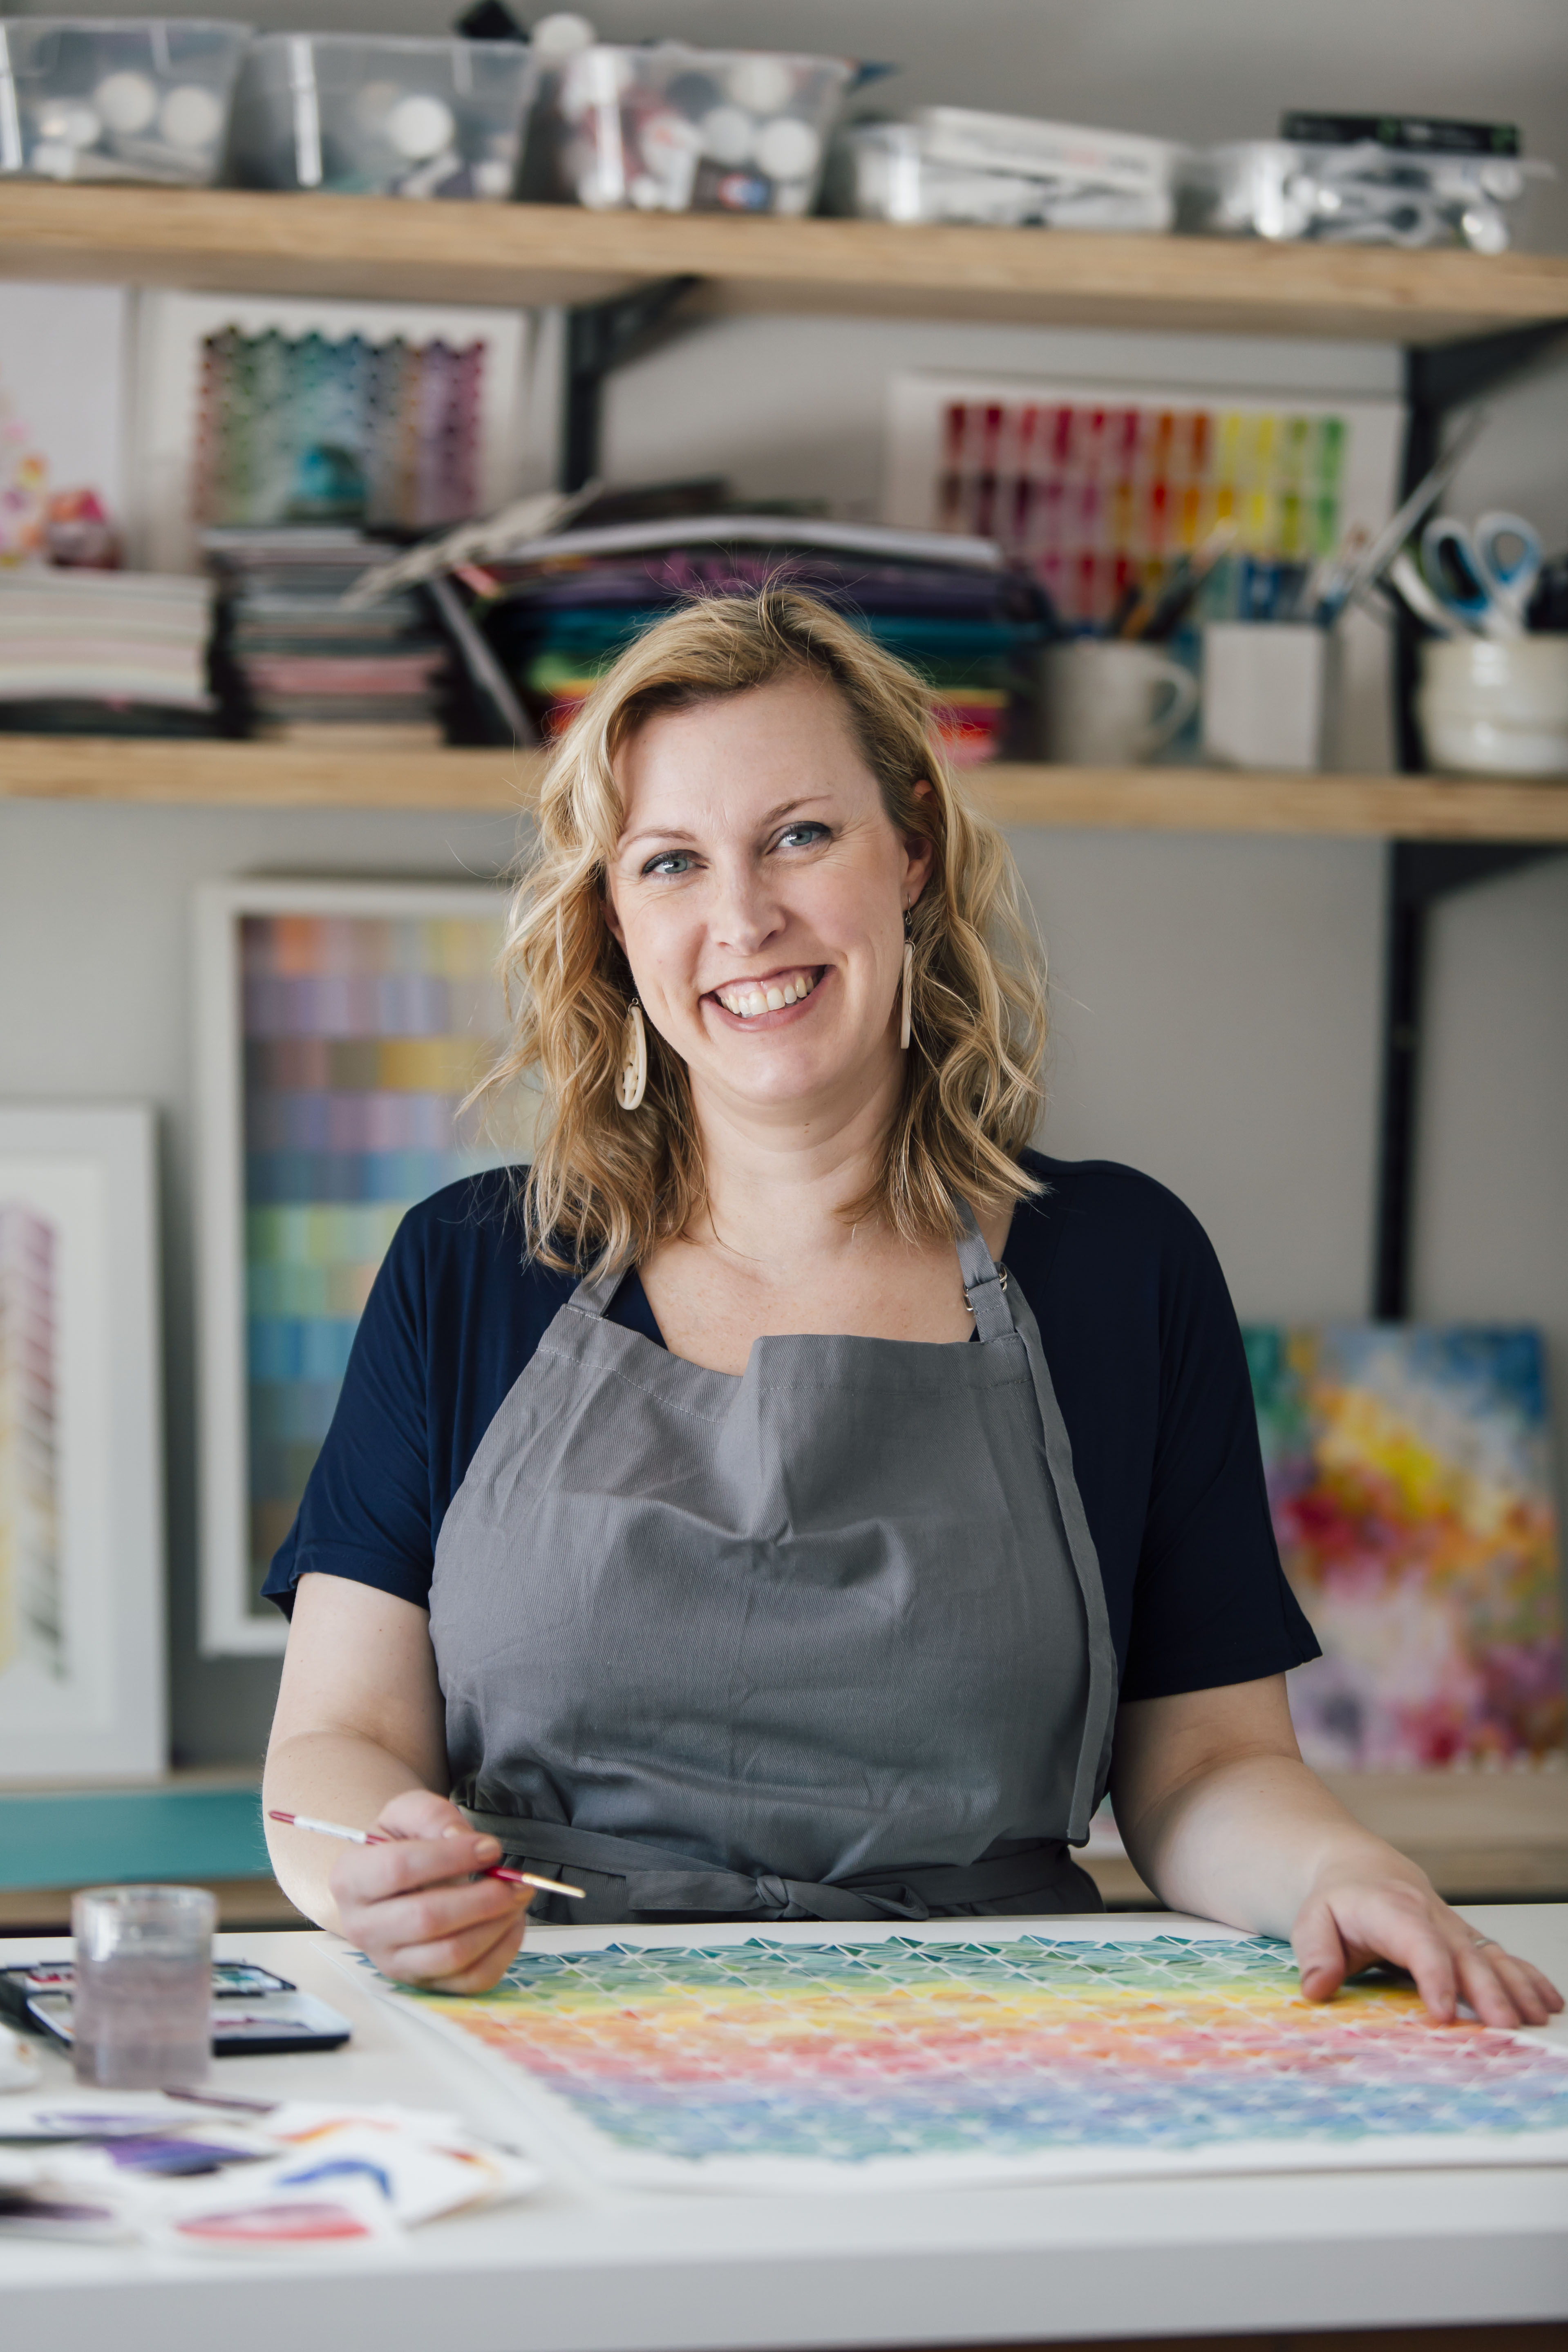 ModernWell - Watercolor and Flow with Josie Lewis | Events | ModernWell